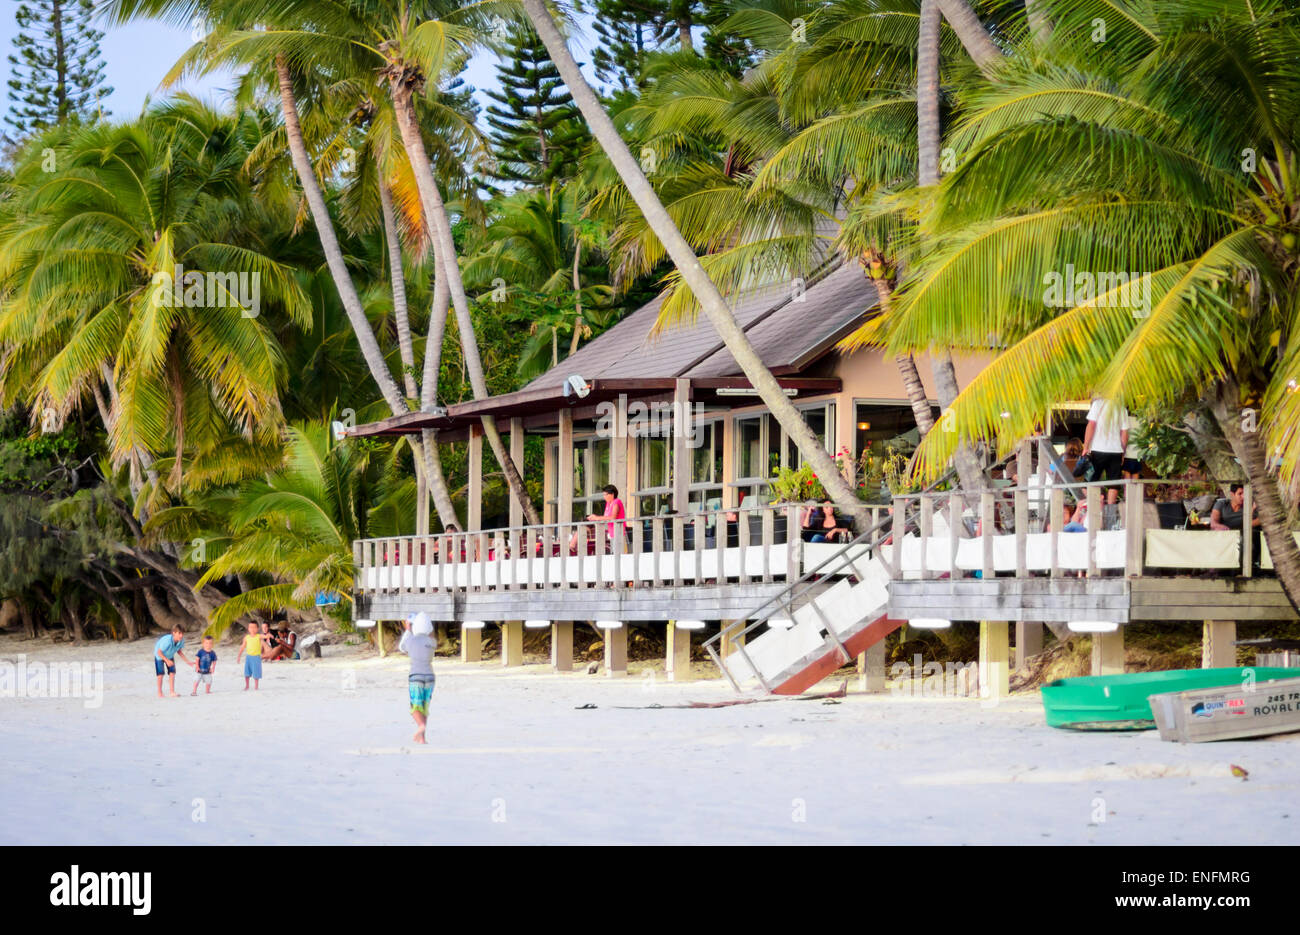 Rustic beach restaurant sheltered by palm trees, on a beautiful tropical island. Isle of Pines, New Caledonia, South Pacific. Stock Photo